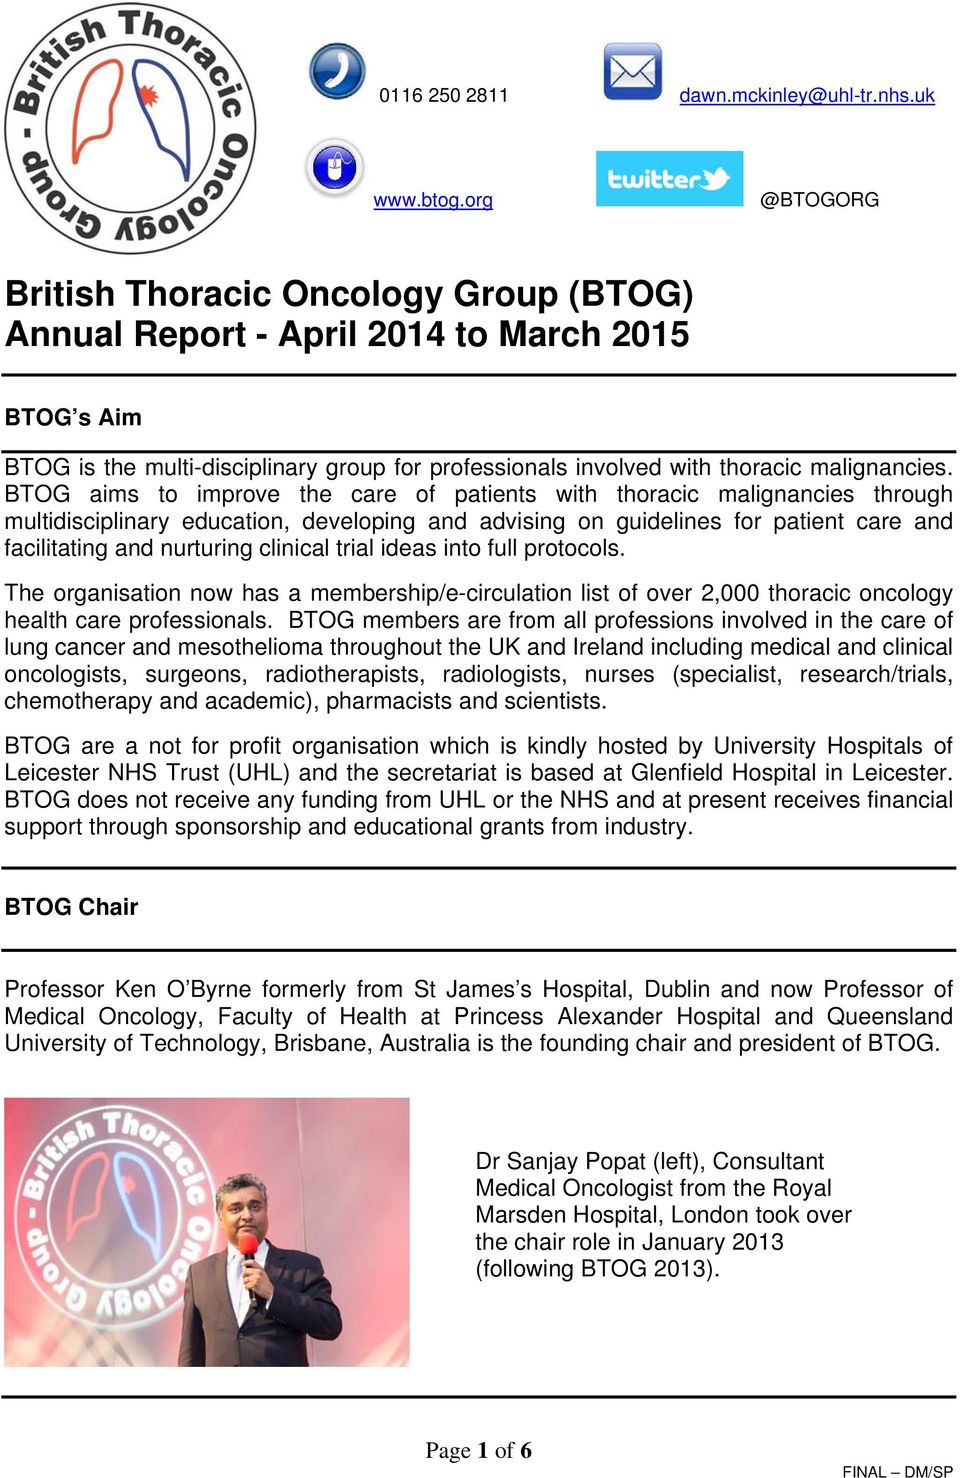 BTOG aims to improve the care of patients with thoracic malignancies through multidisciplinary education, developing and advising on guidelines for patient care and facilitating and nurturing